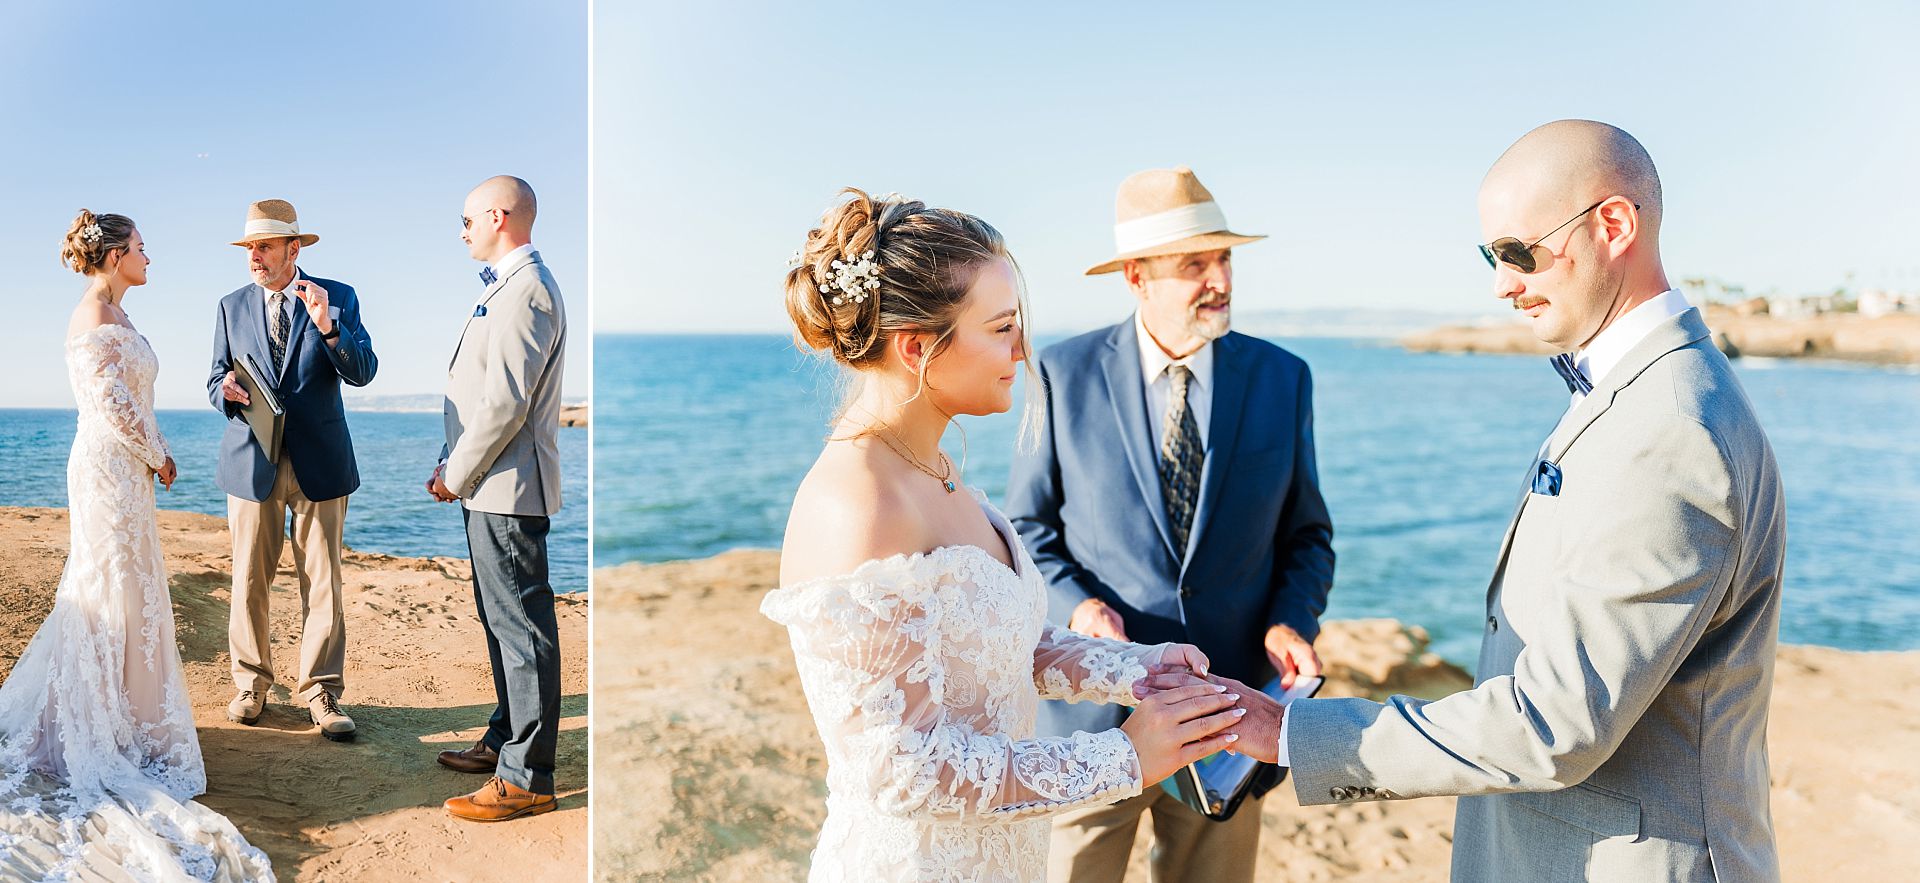 Bride and groom doing a ring exchange at an intimate Sunset Cliffs wedding in San Diego.